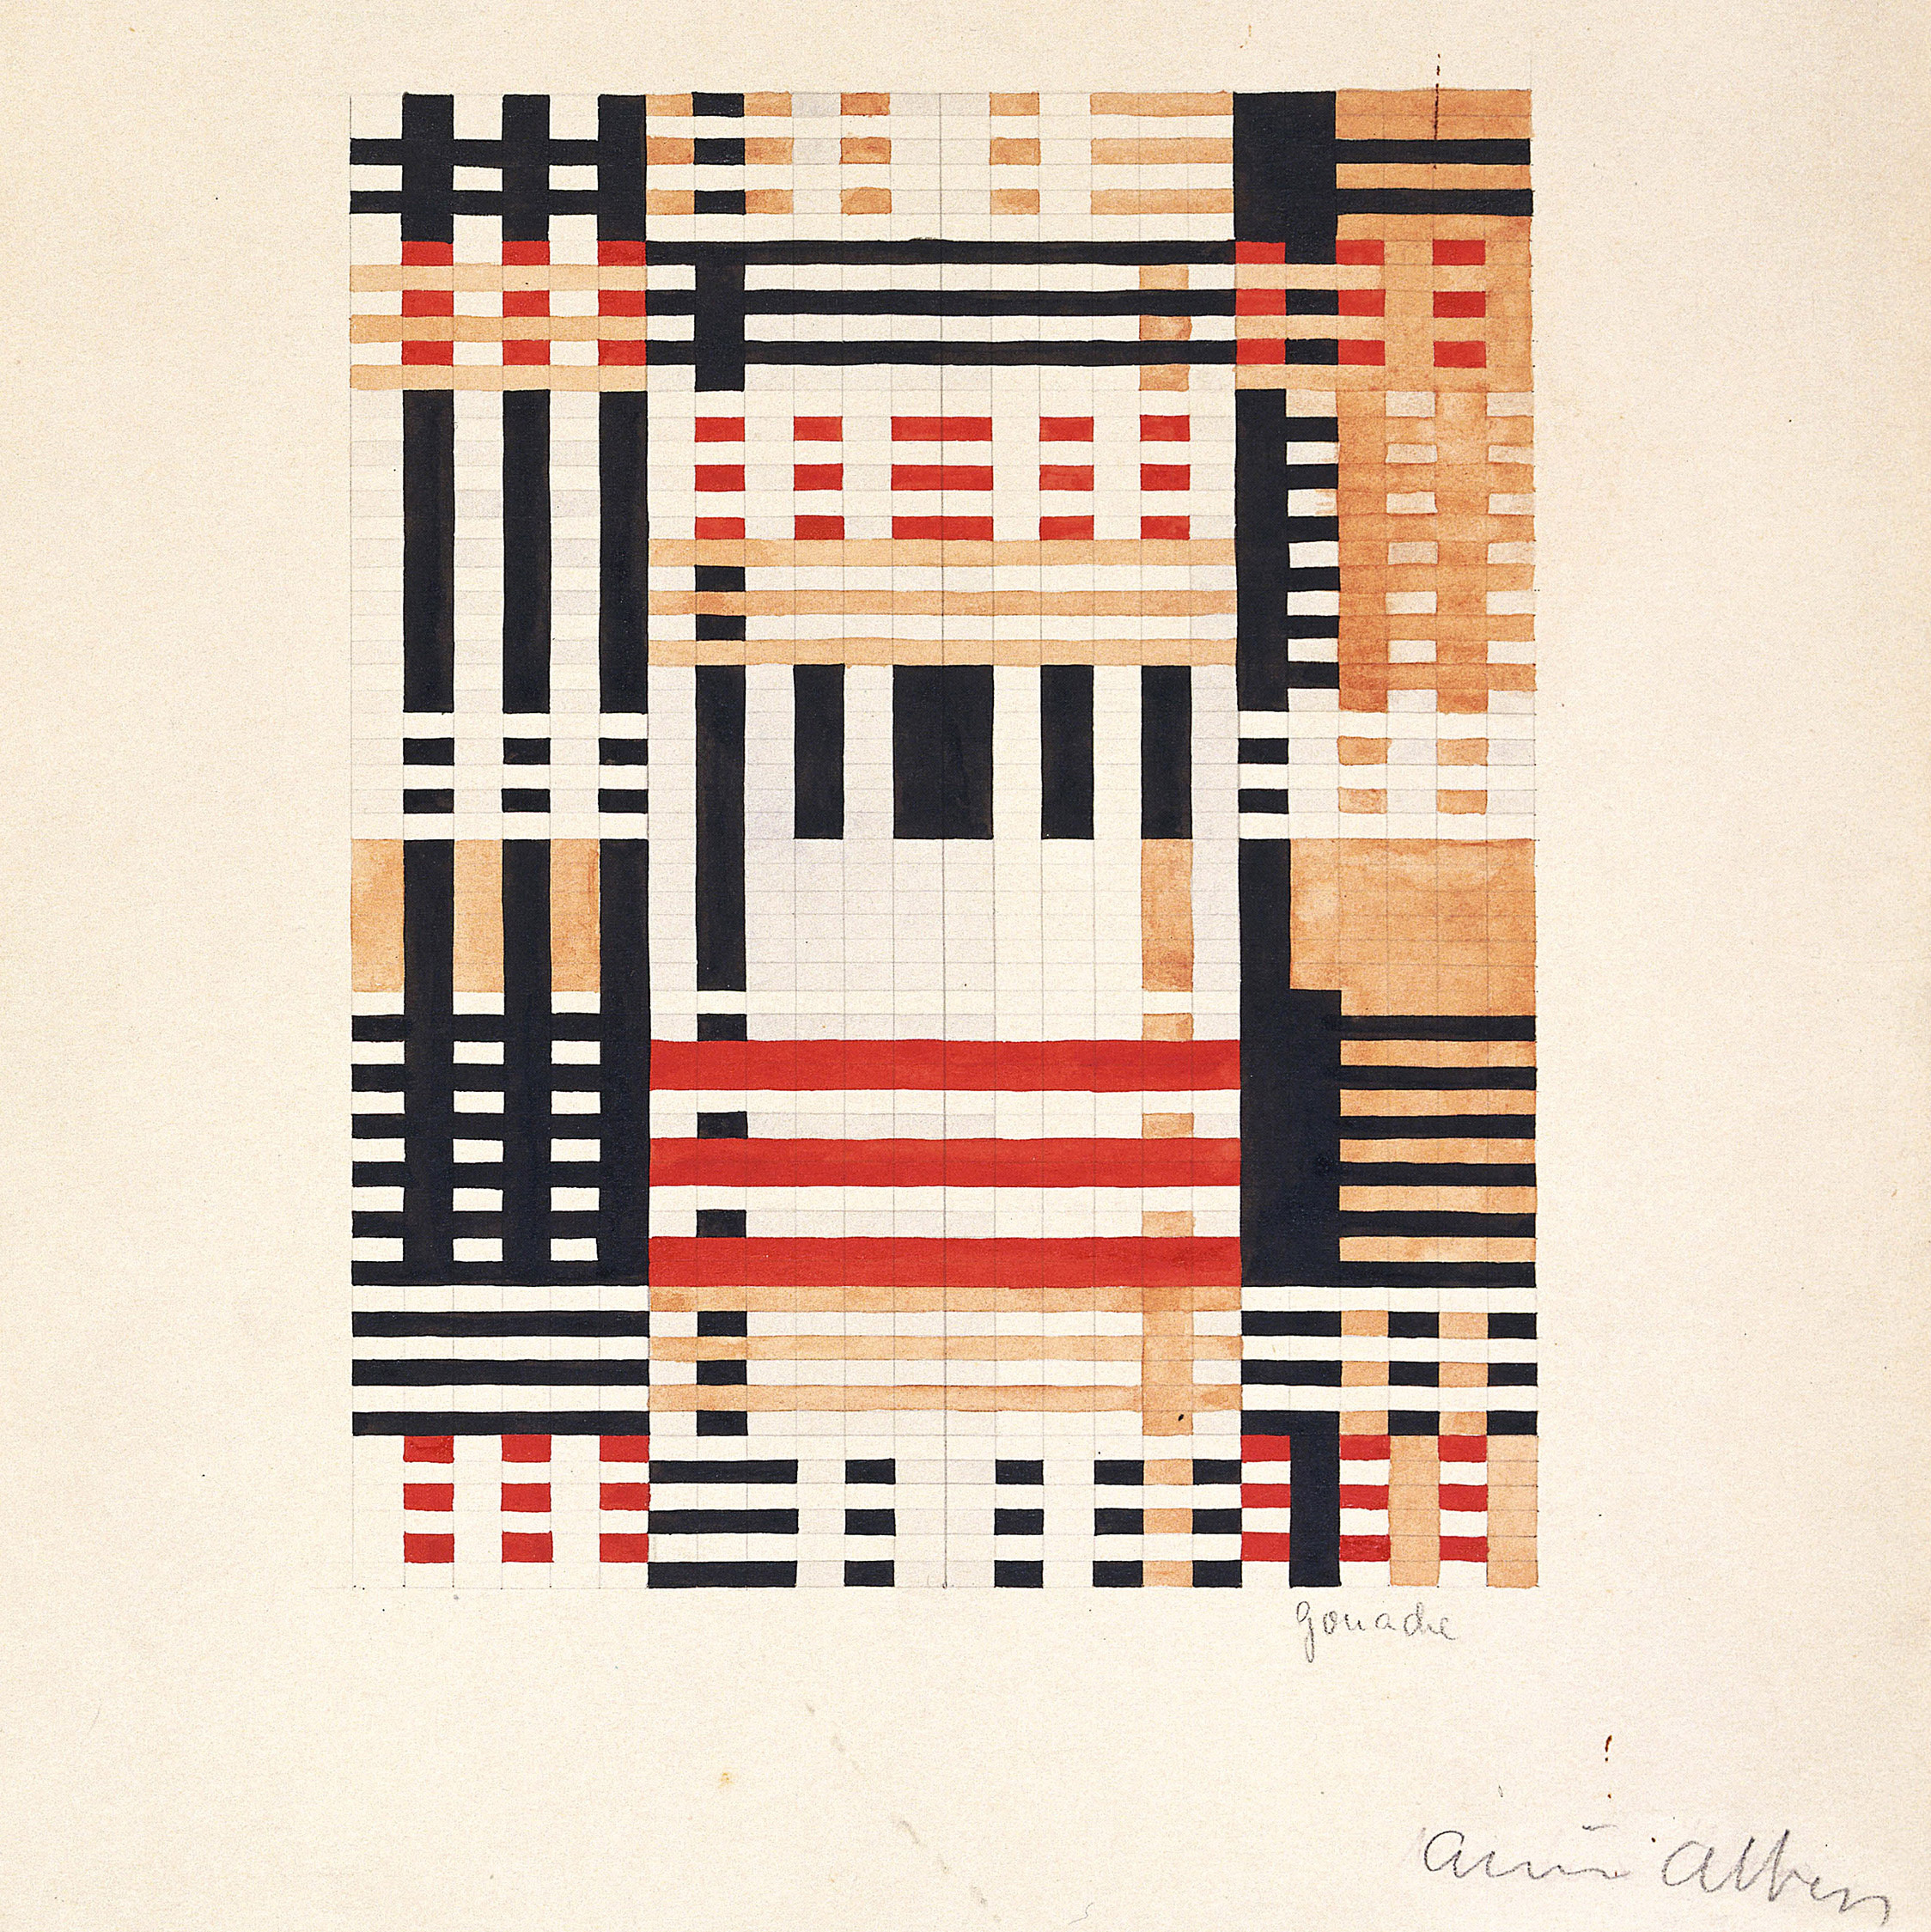 Tate Modern curator selects five of Anni Albers' radical weaving designs